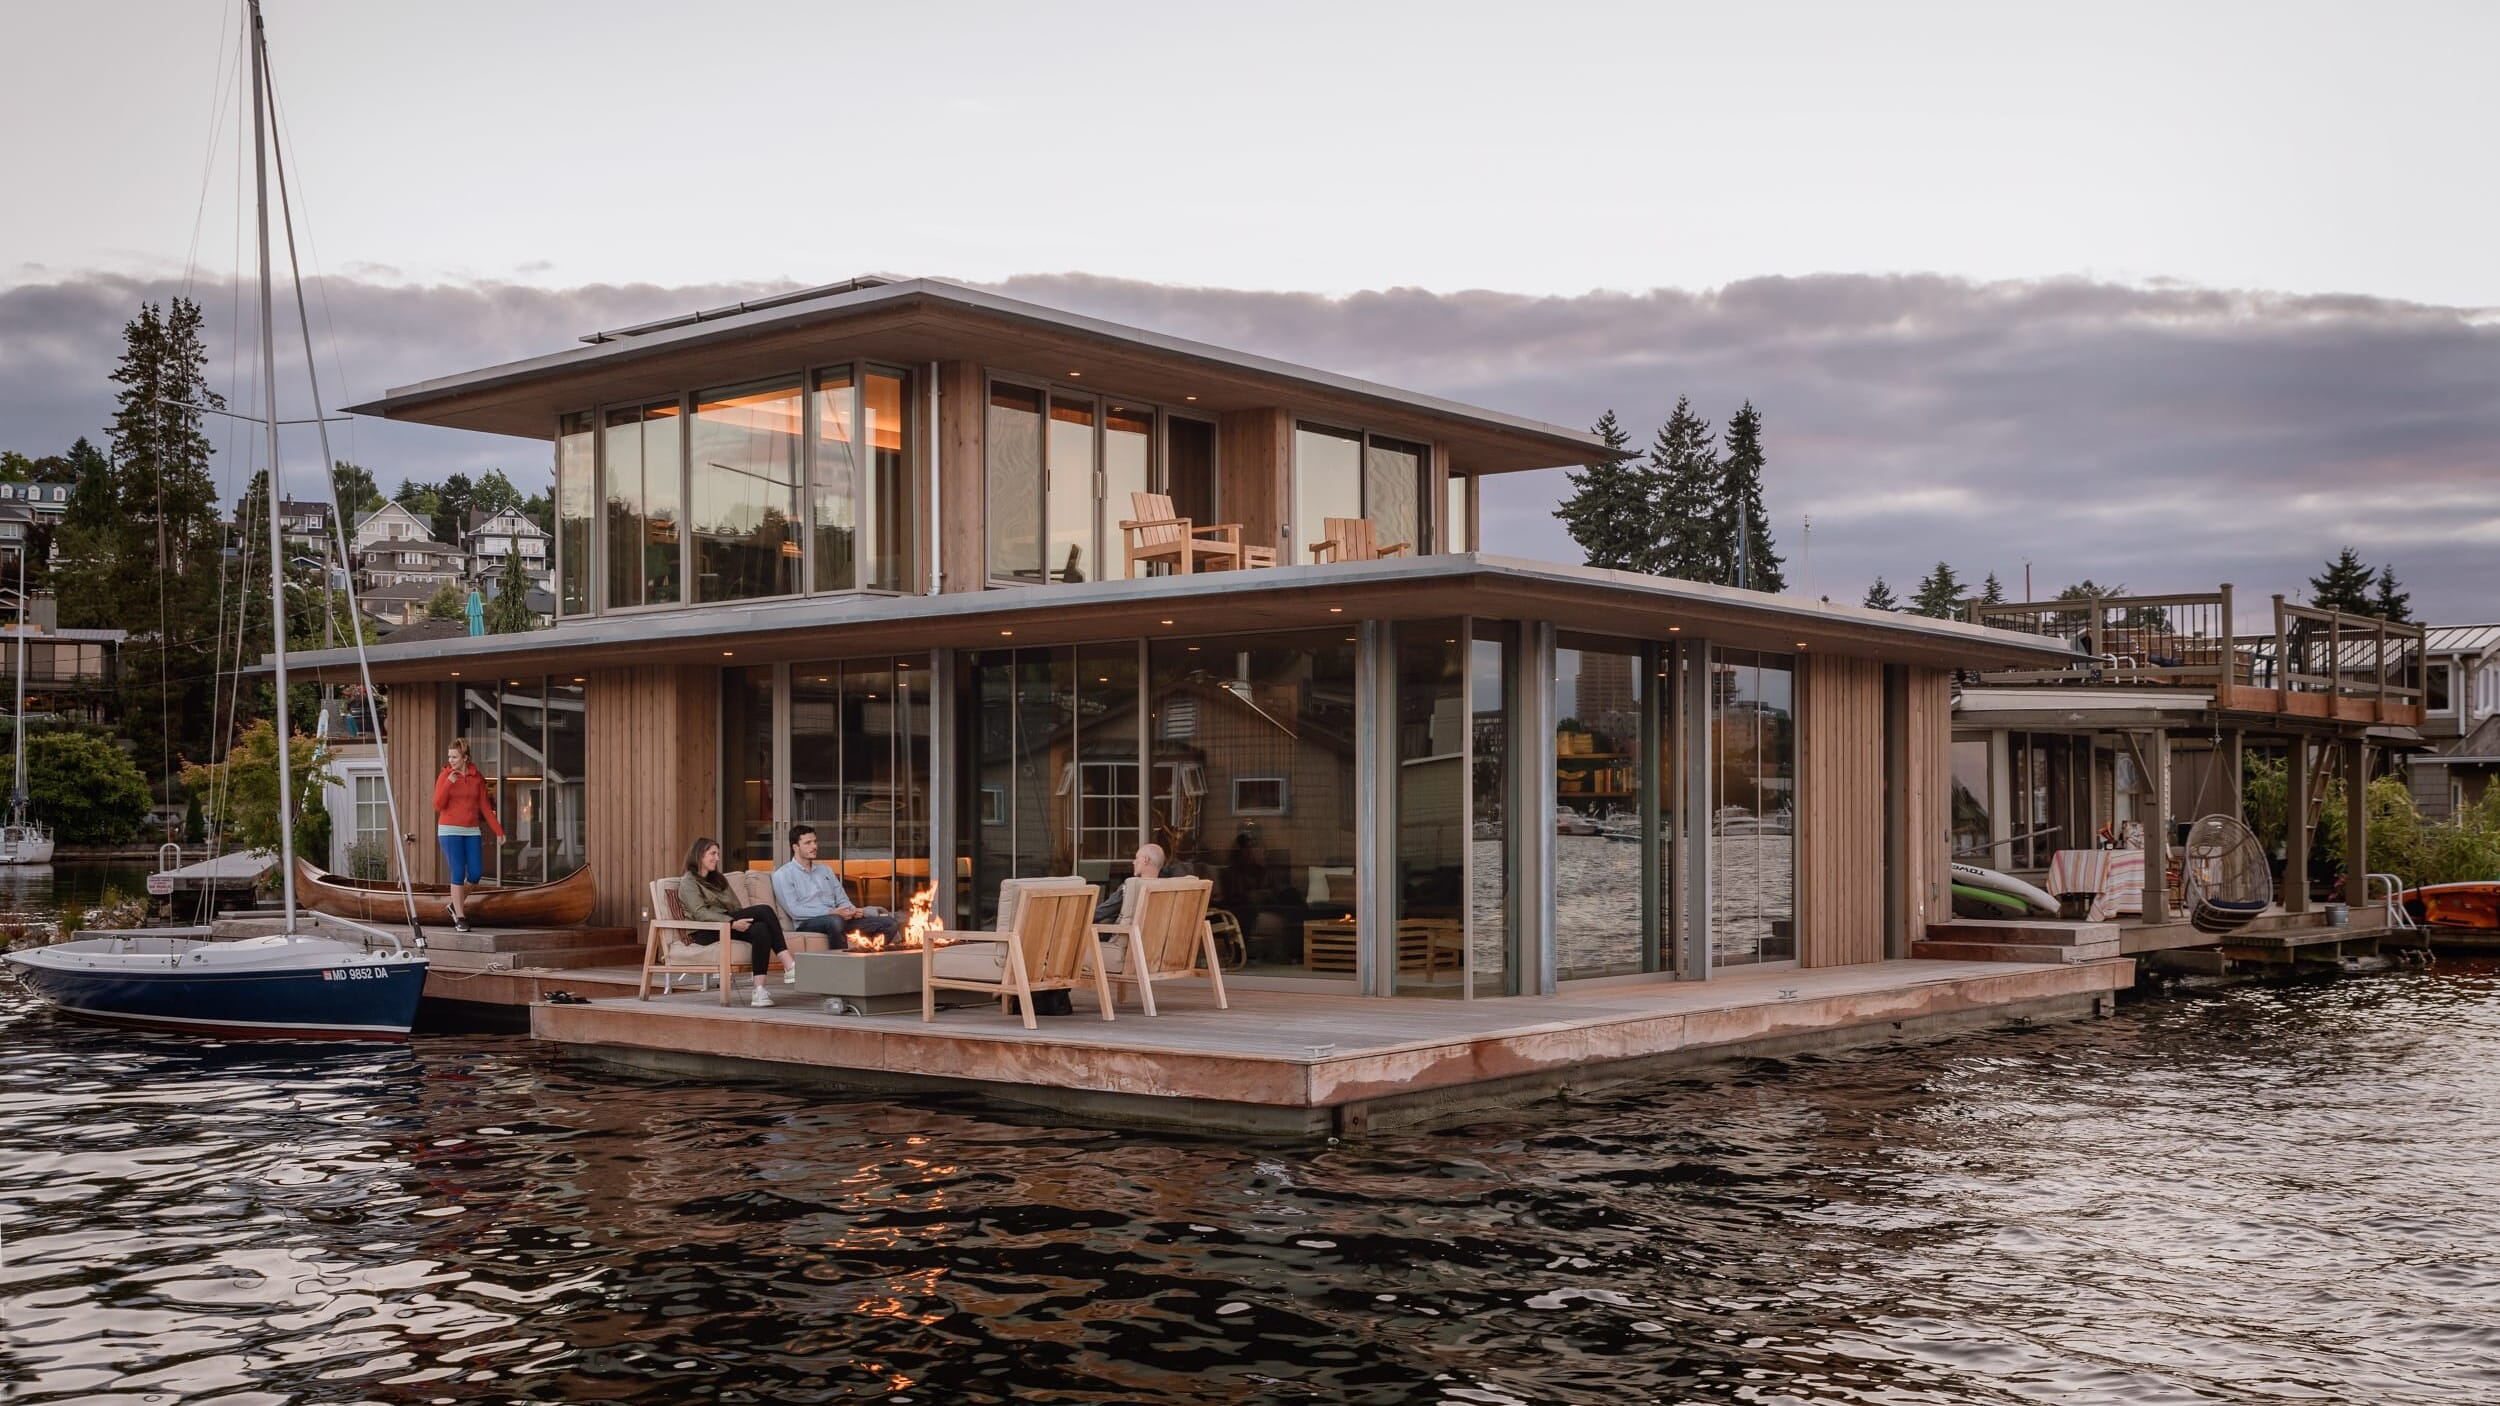 A floating house on a body of water.